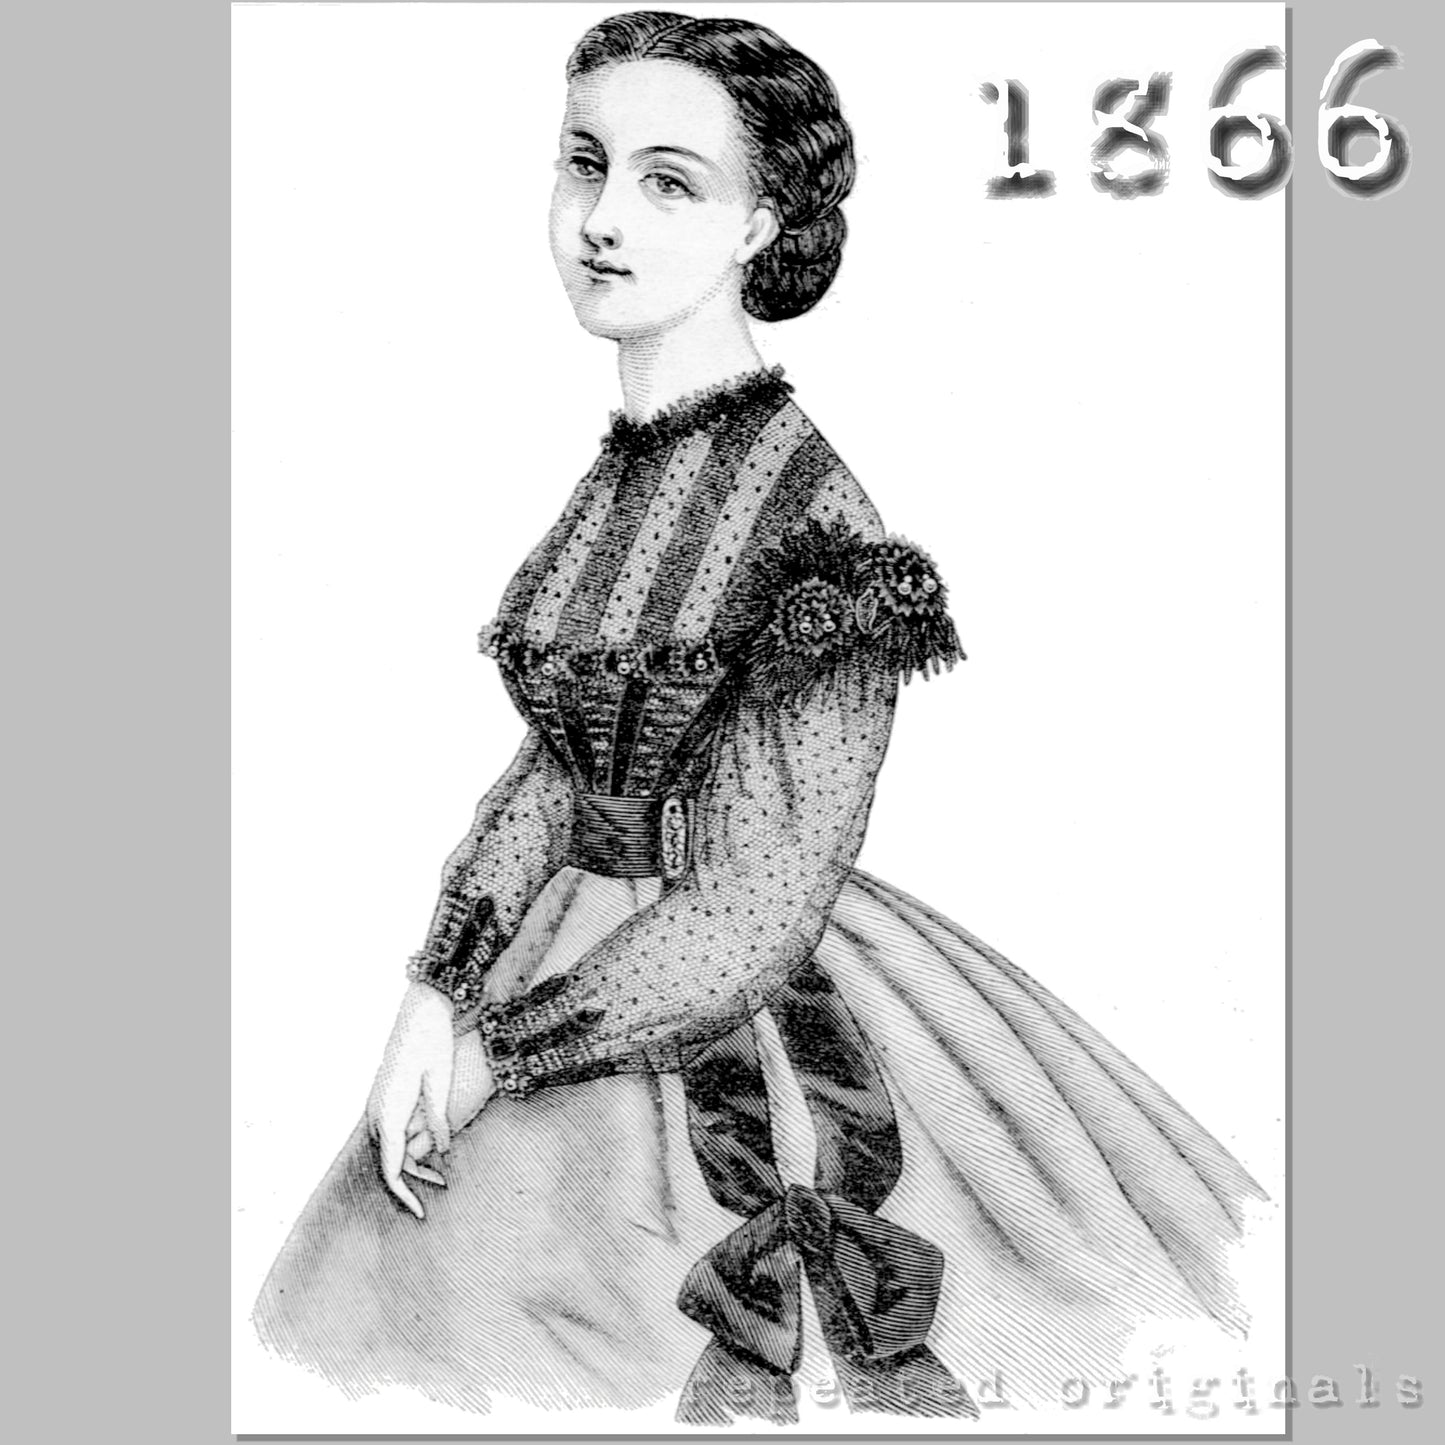 1866 Canezou Sewing Pattern - INSTANT DOWNLOAD PDF